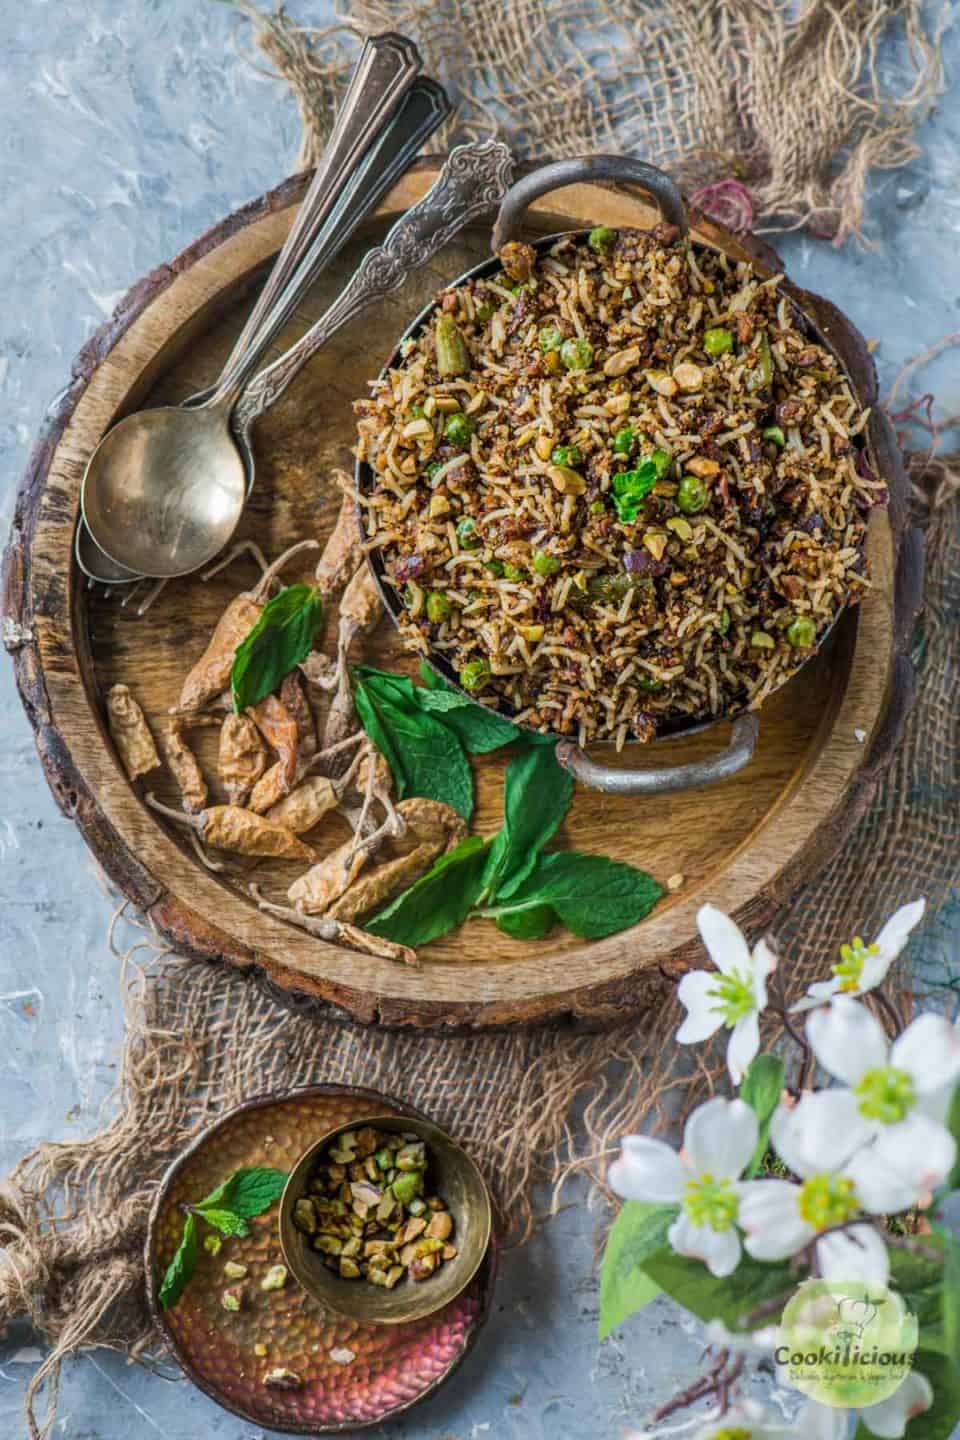 Pistachio Mint Rice served in a wooden tray